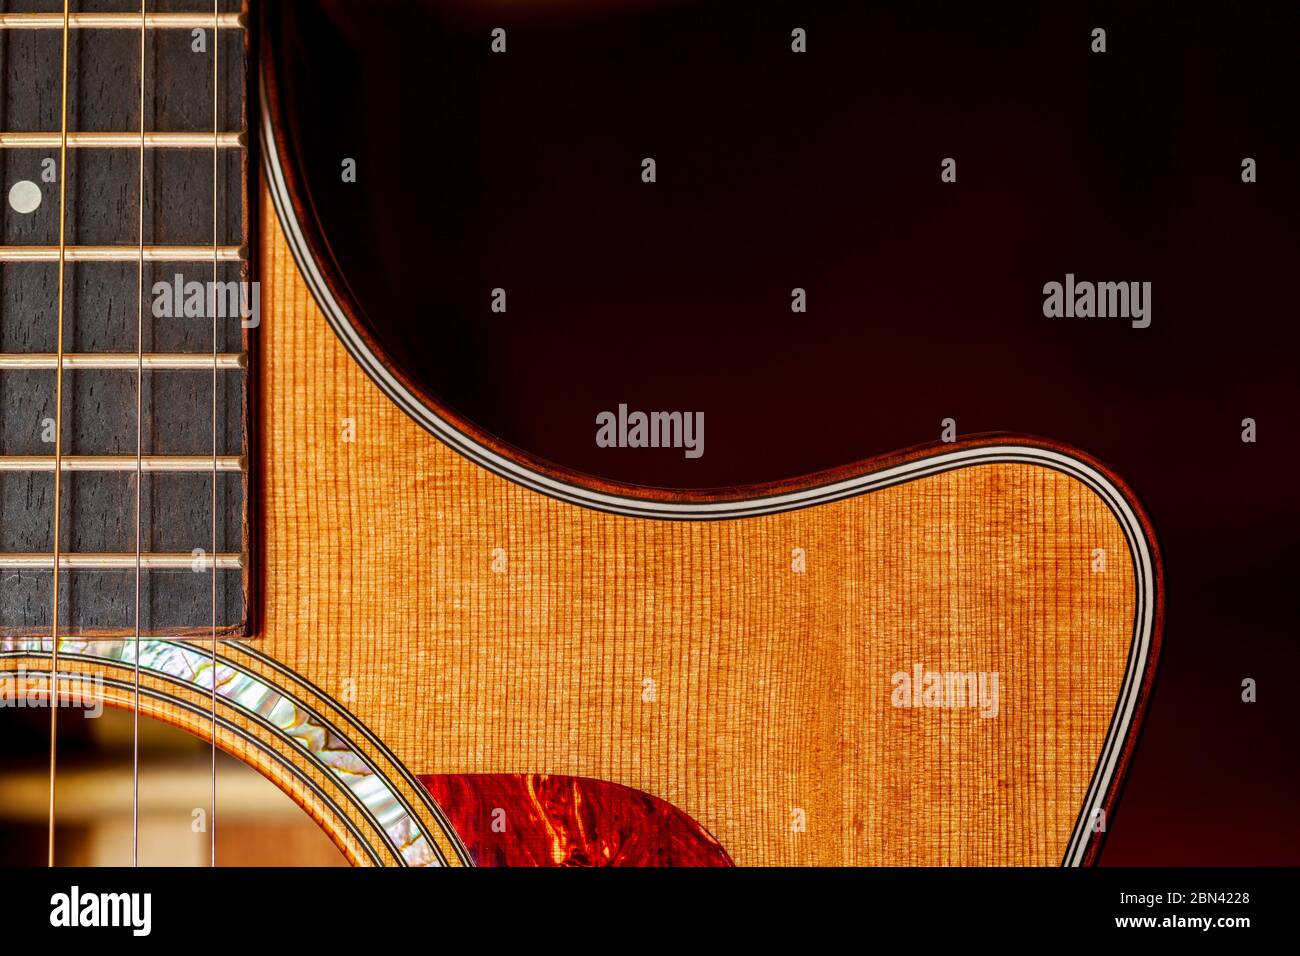 Detail of an Acoustic Guitar, fret board and strings Stock Photo